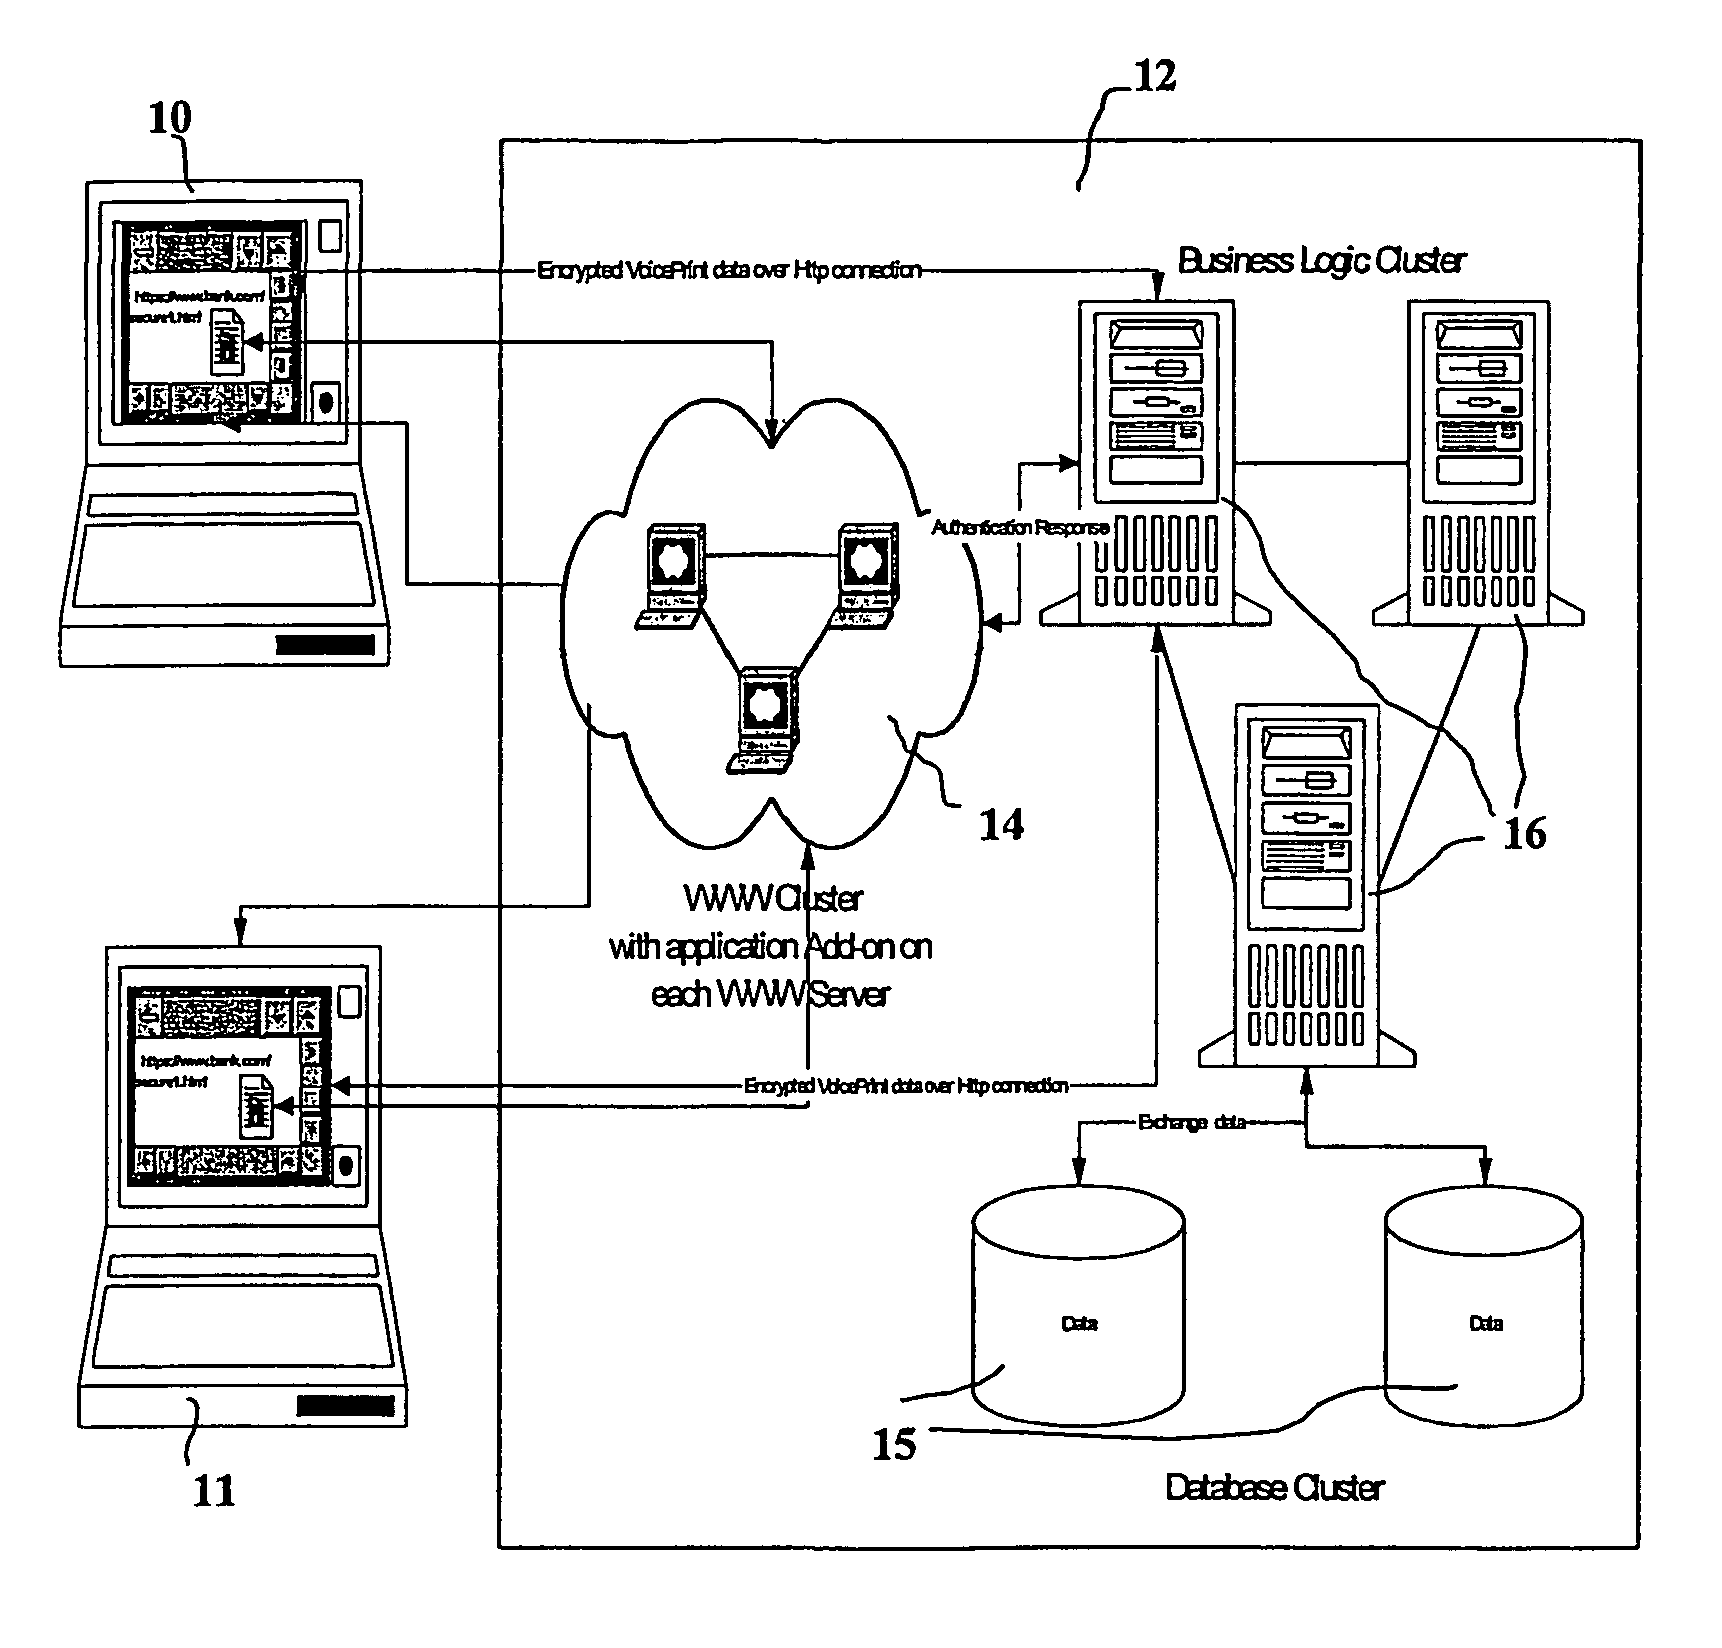 Biometric-based system and method for enabling authentication of electronic messages sent over a network